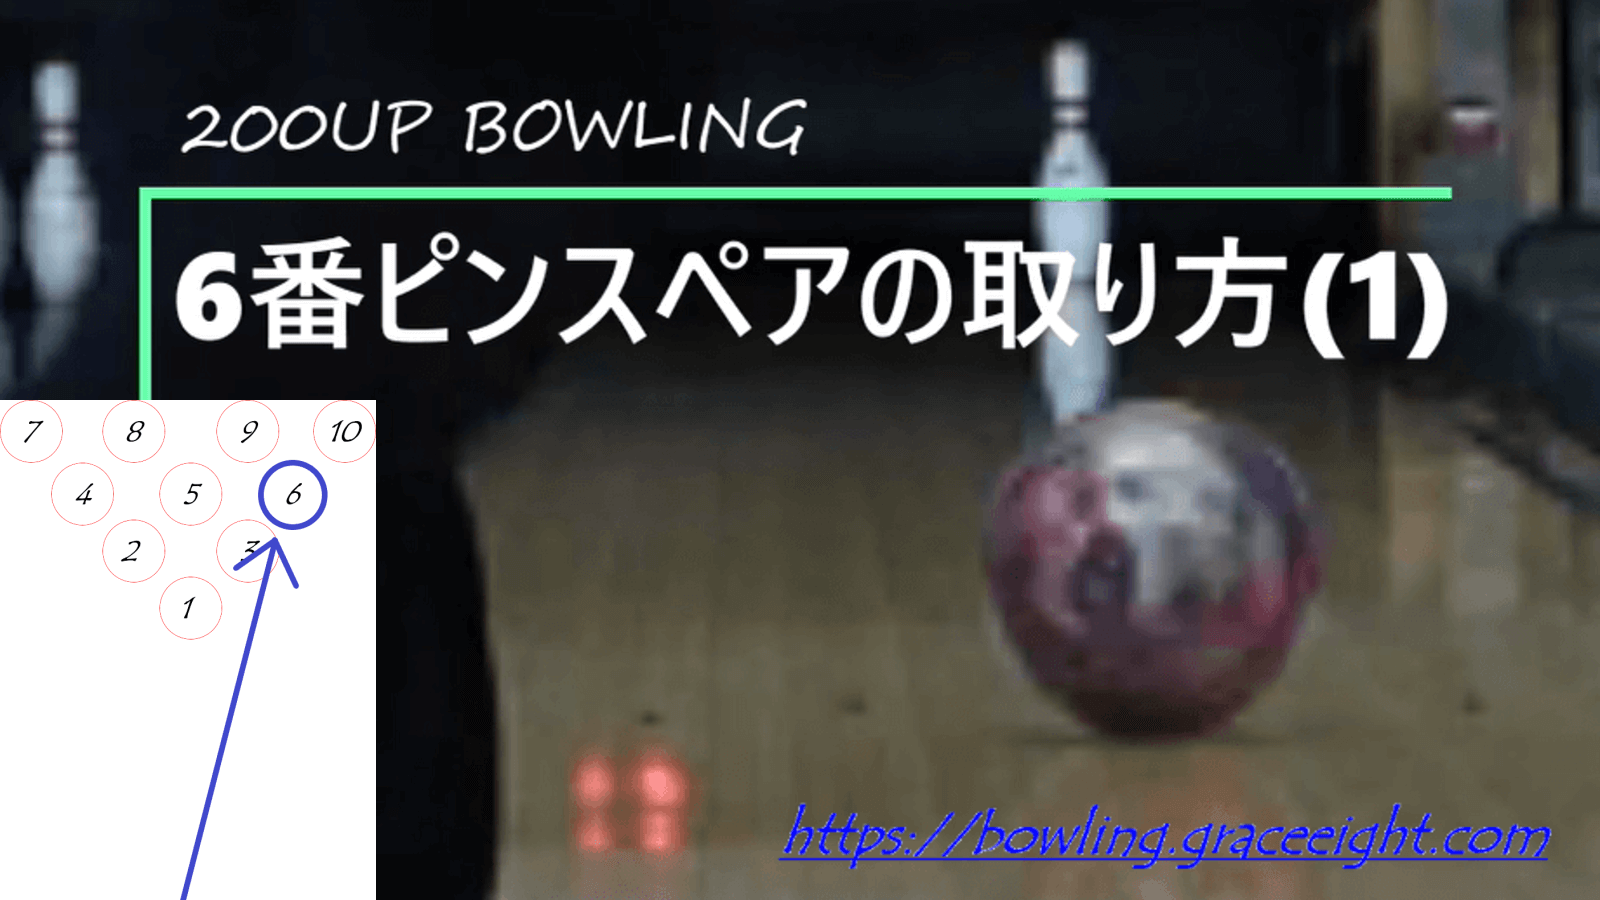 bowling-6-spare-01